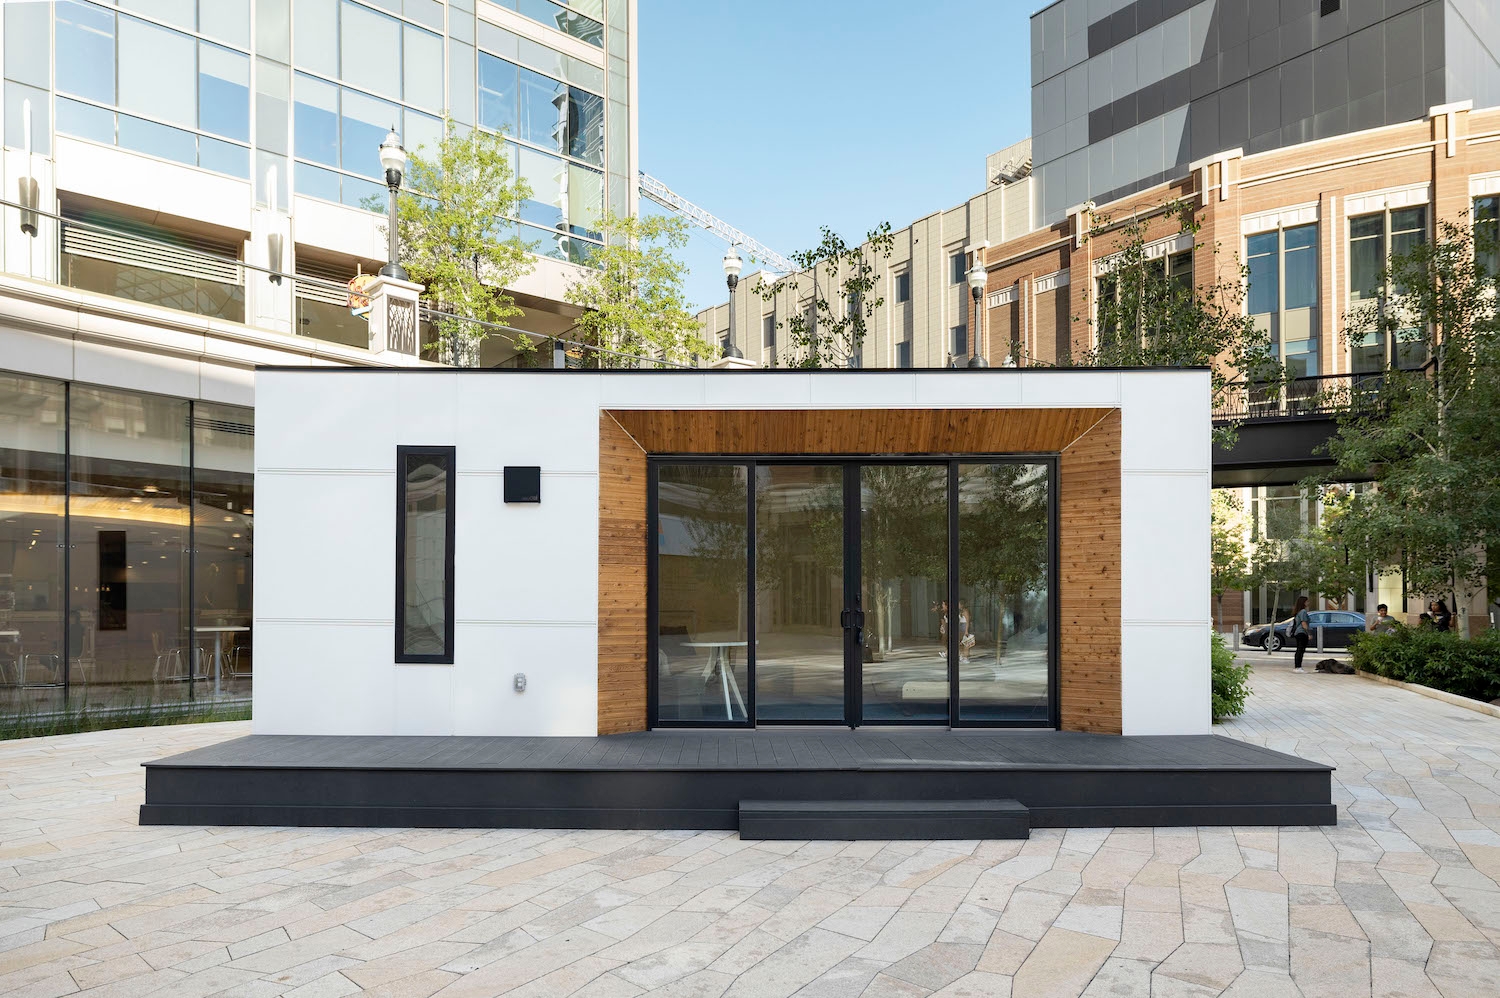 A small prefab home sitting in the courtyard of a city mall to function as a showroom